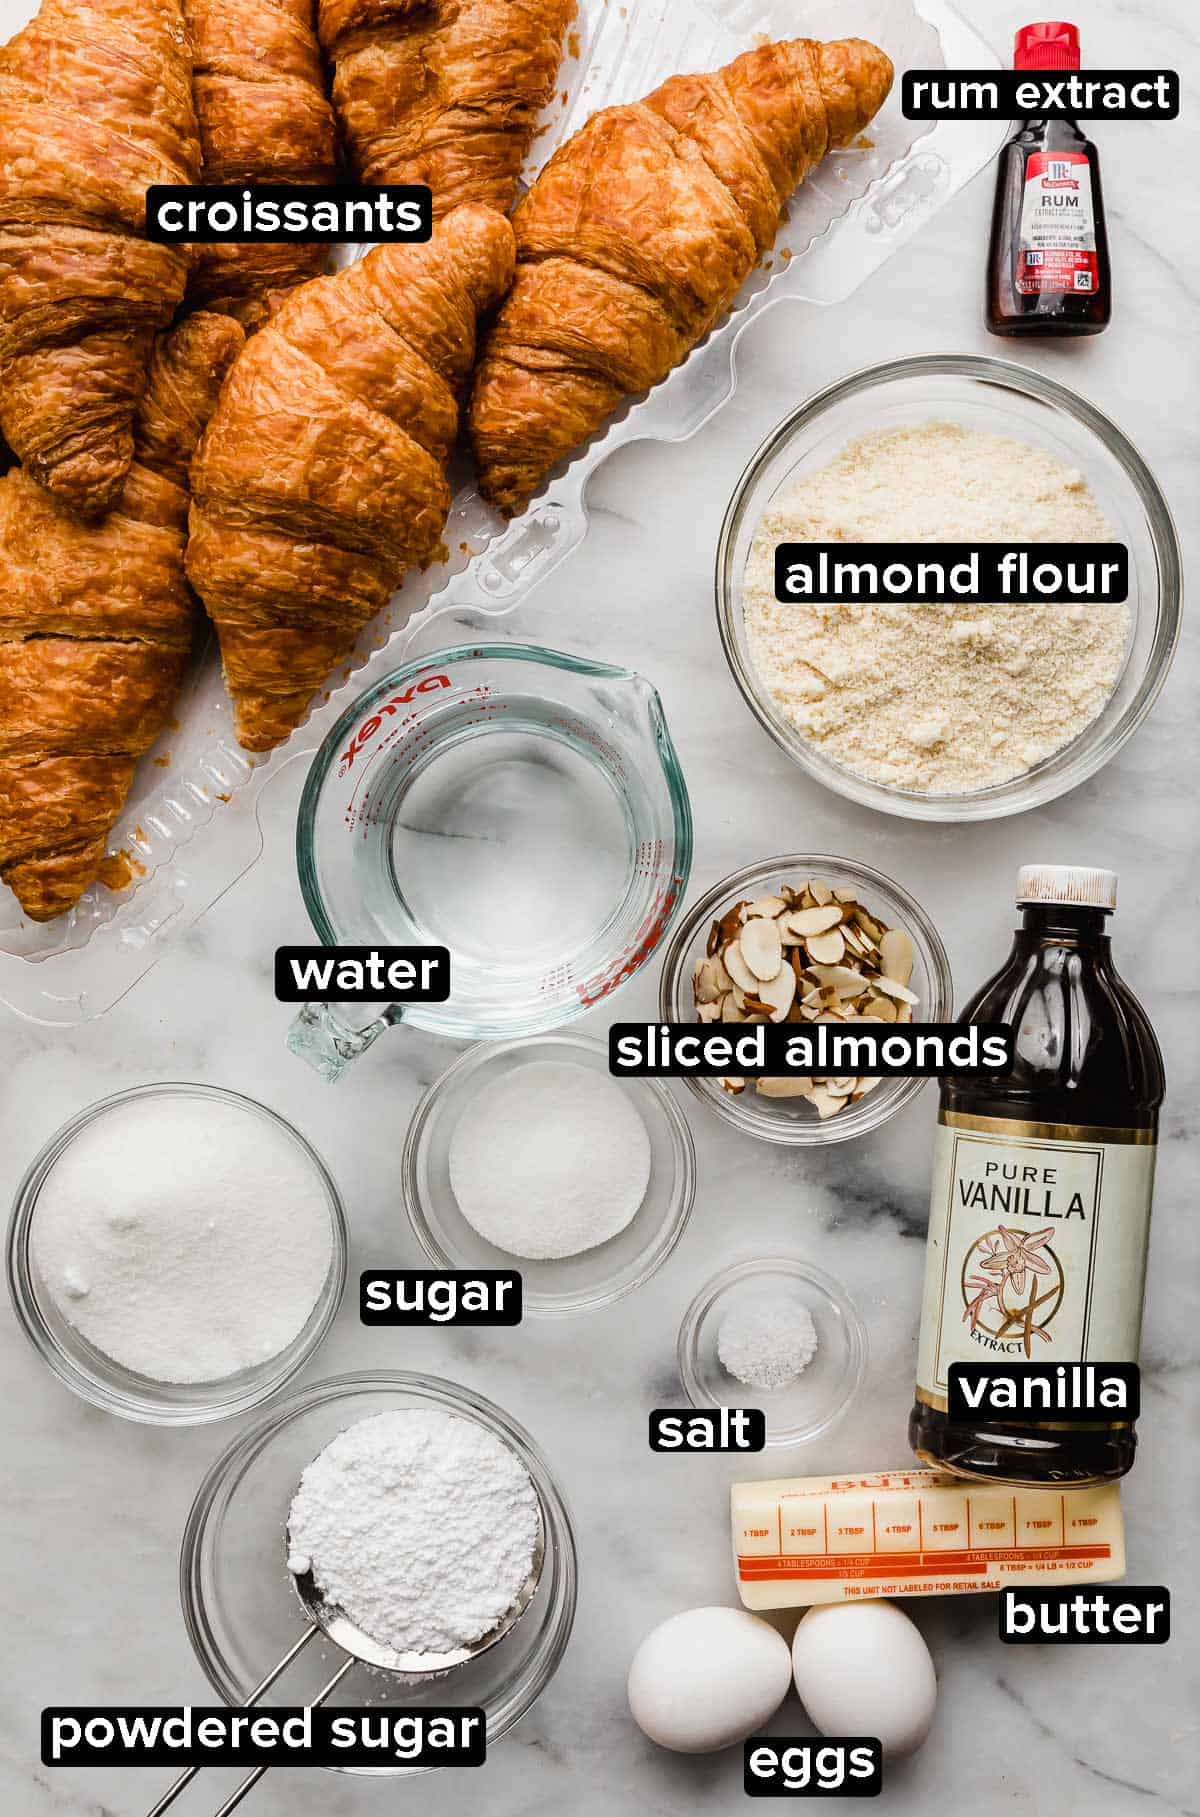 Almond Croissants recipe ingredients on a white background: croissants, almond flour, water, vanilla, eggs, butter, sugar, sliced almonds, and rum extract.